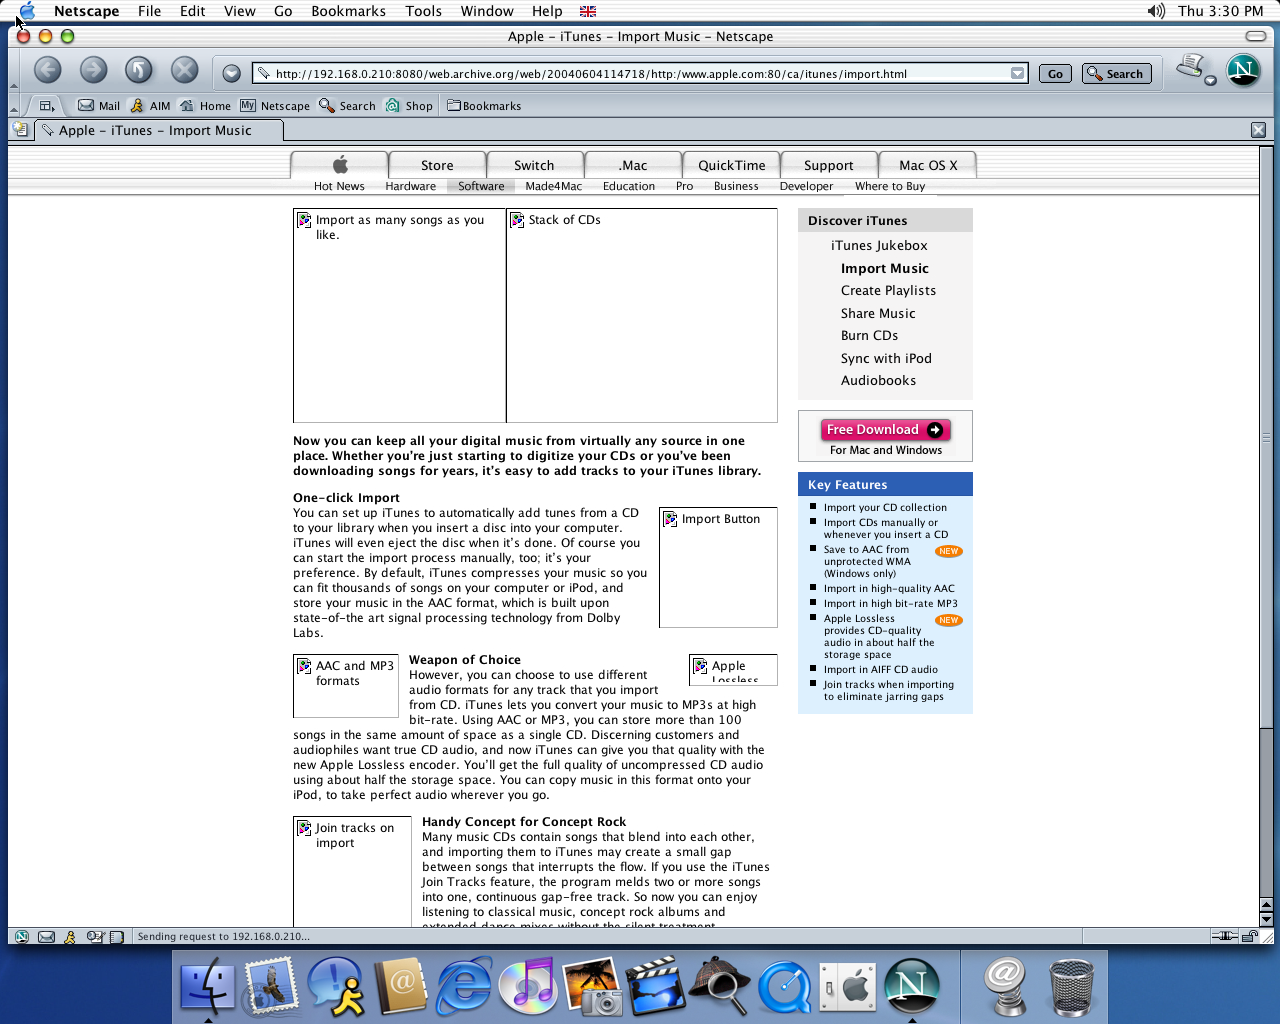 OS X 10.2 PPC with Netscape 7.0 displaying a page from Apple.com archived at June 04, 2004 at 11:47:18